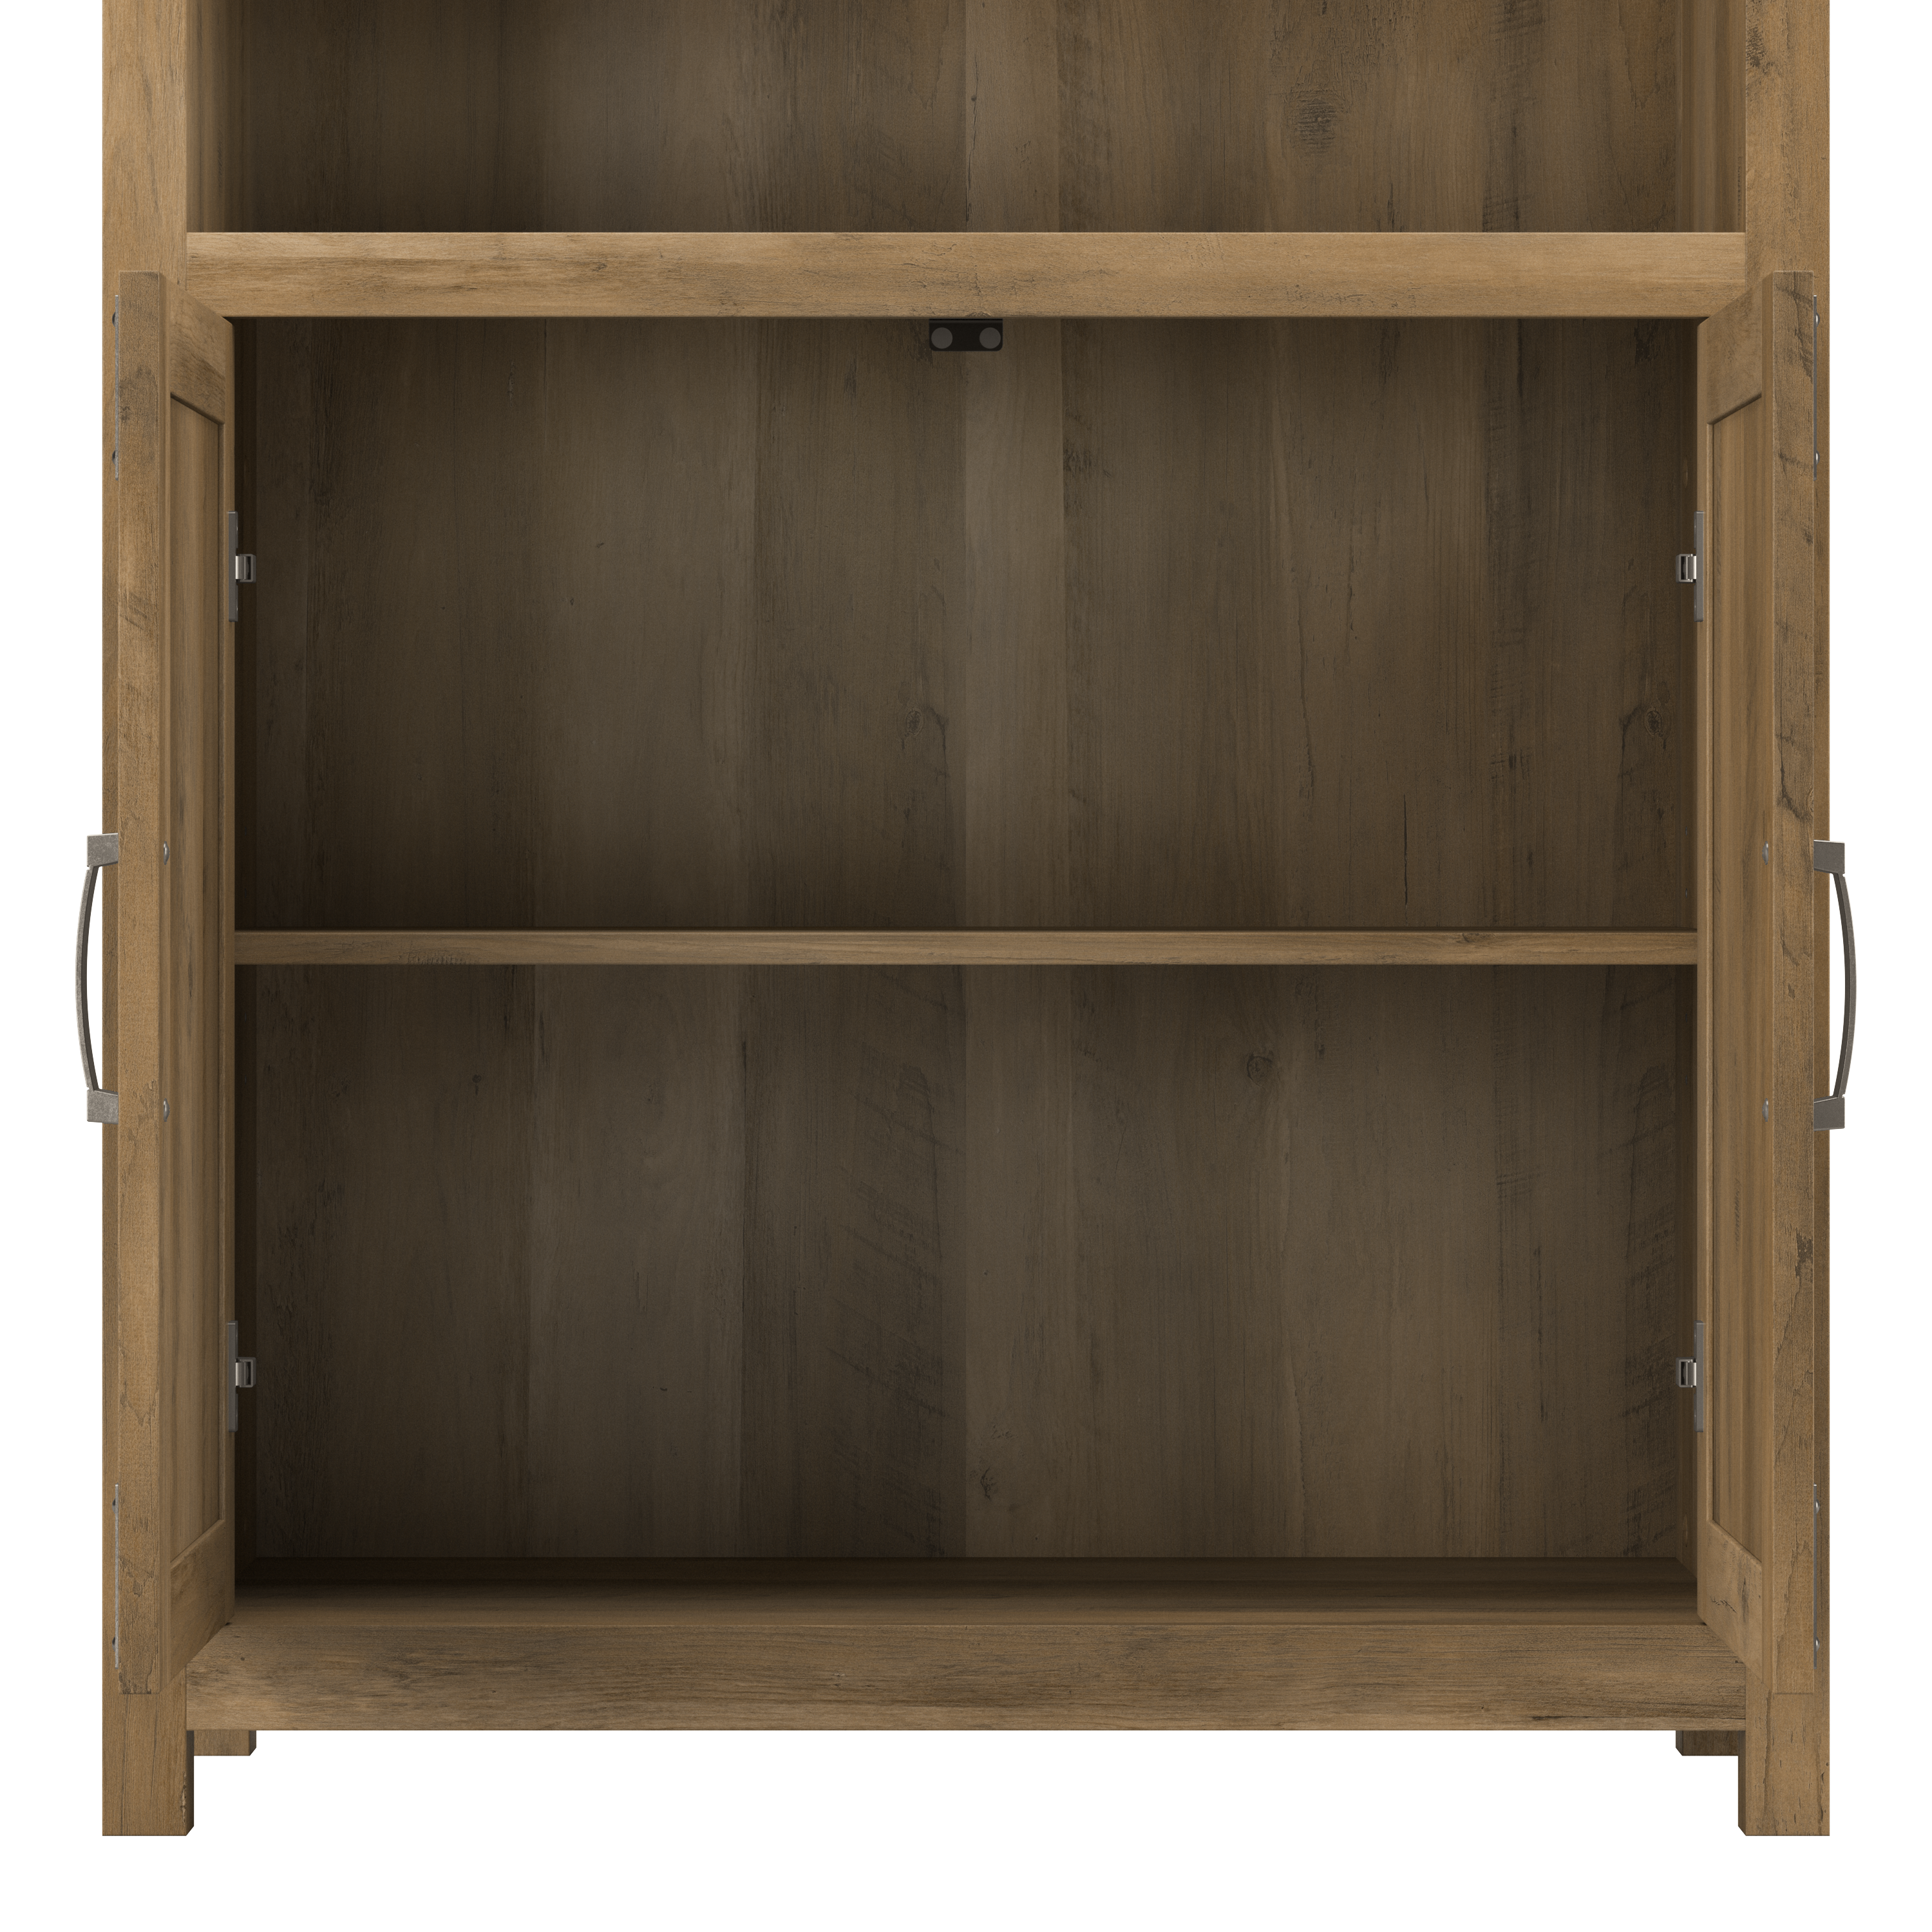 Shop Bush Furniture Knoxville Tall 5 Shelf Bookcase with Doors 03 CGB132RCP-03 #color_reclaimed pine